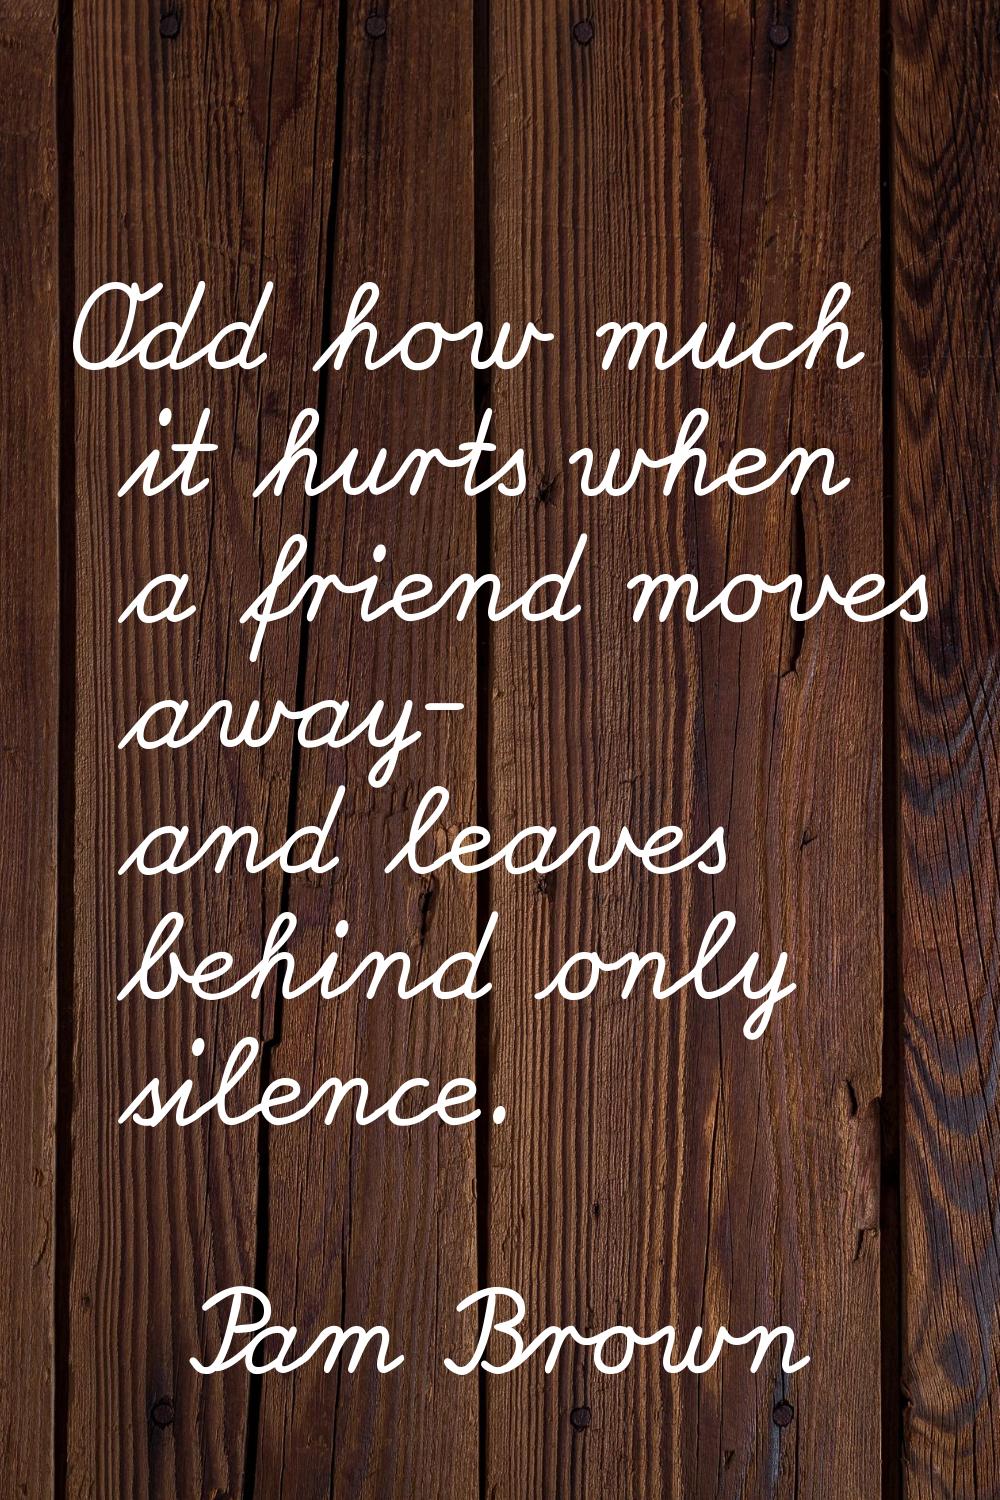 Odd how much it hurts when a friend moves away- and leaves behind only silence.